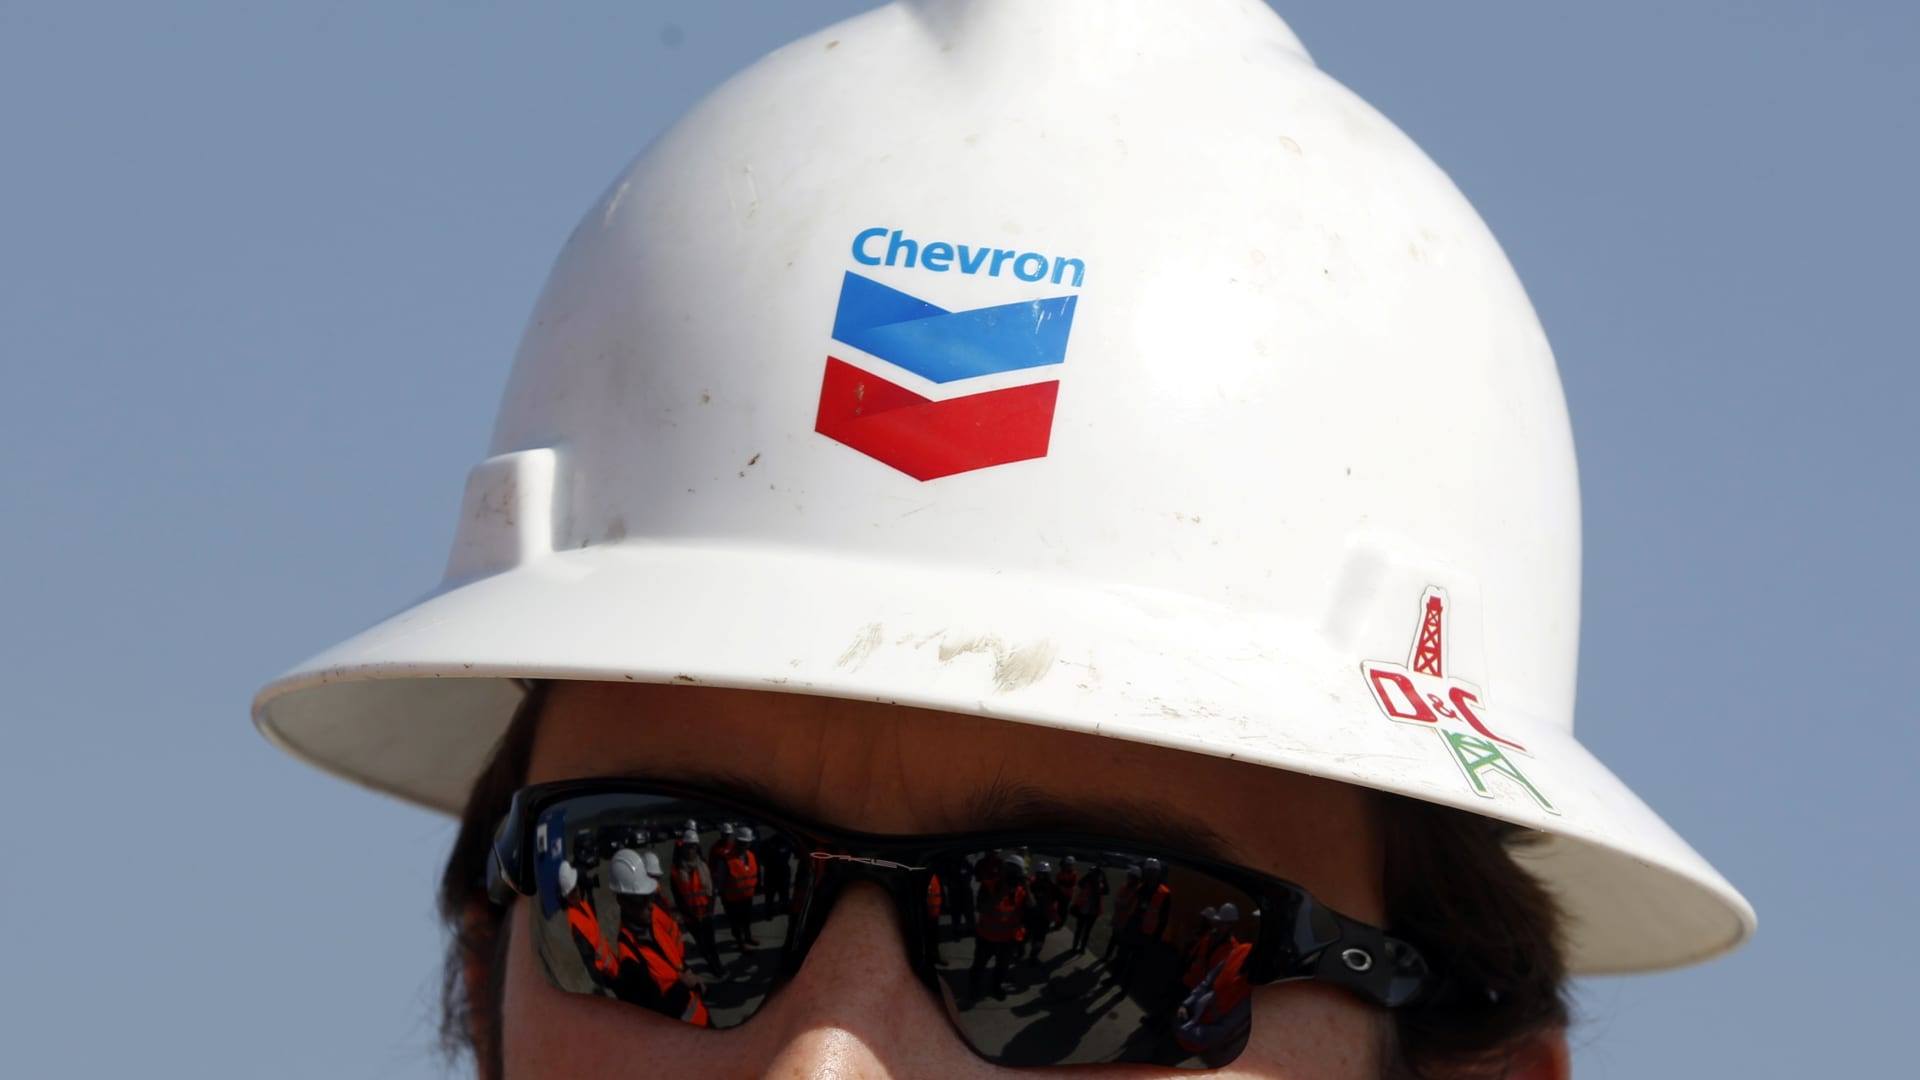 Mizuho upgrades Chevron, says energy giant will benefit from higher oil prices